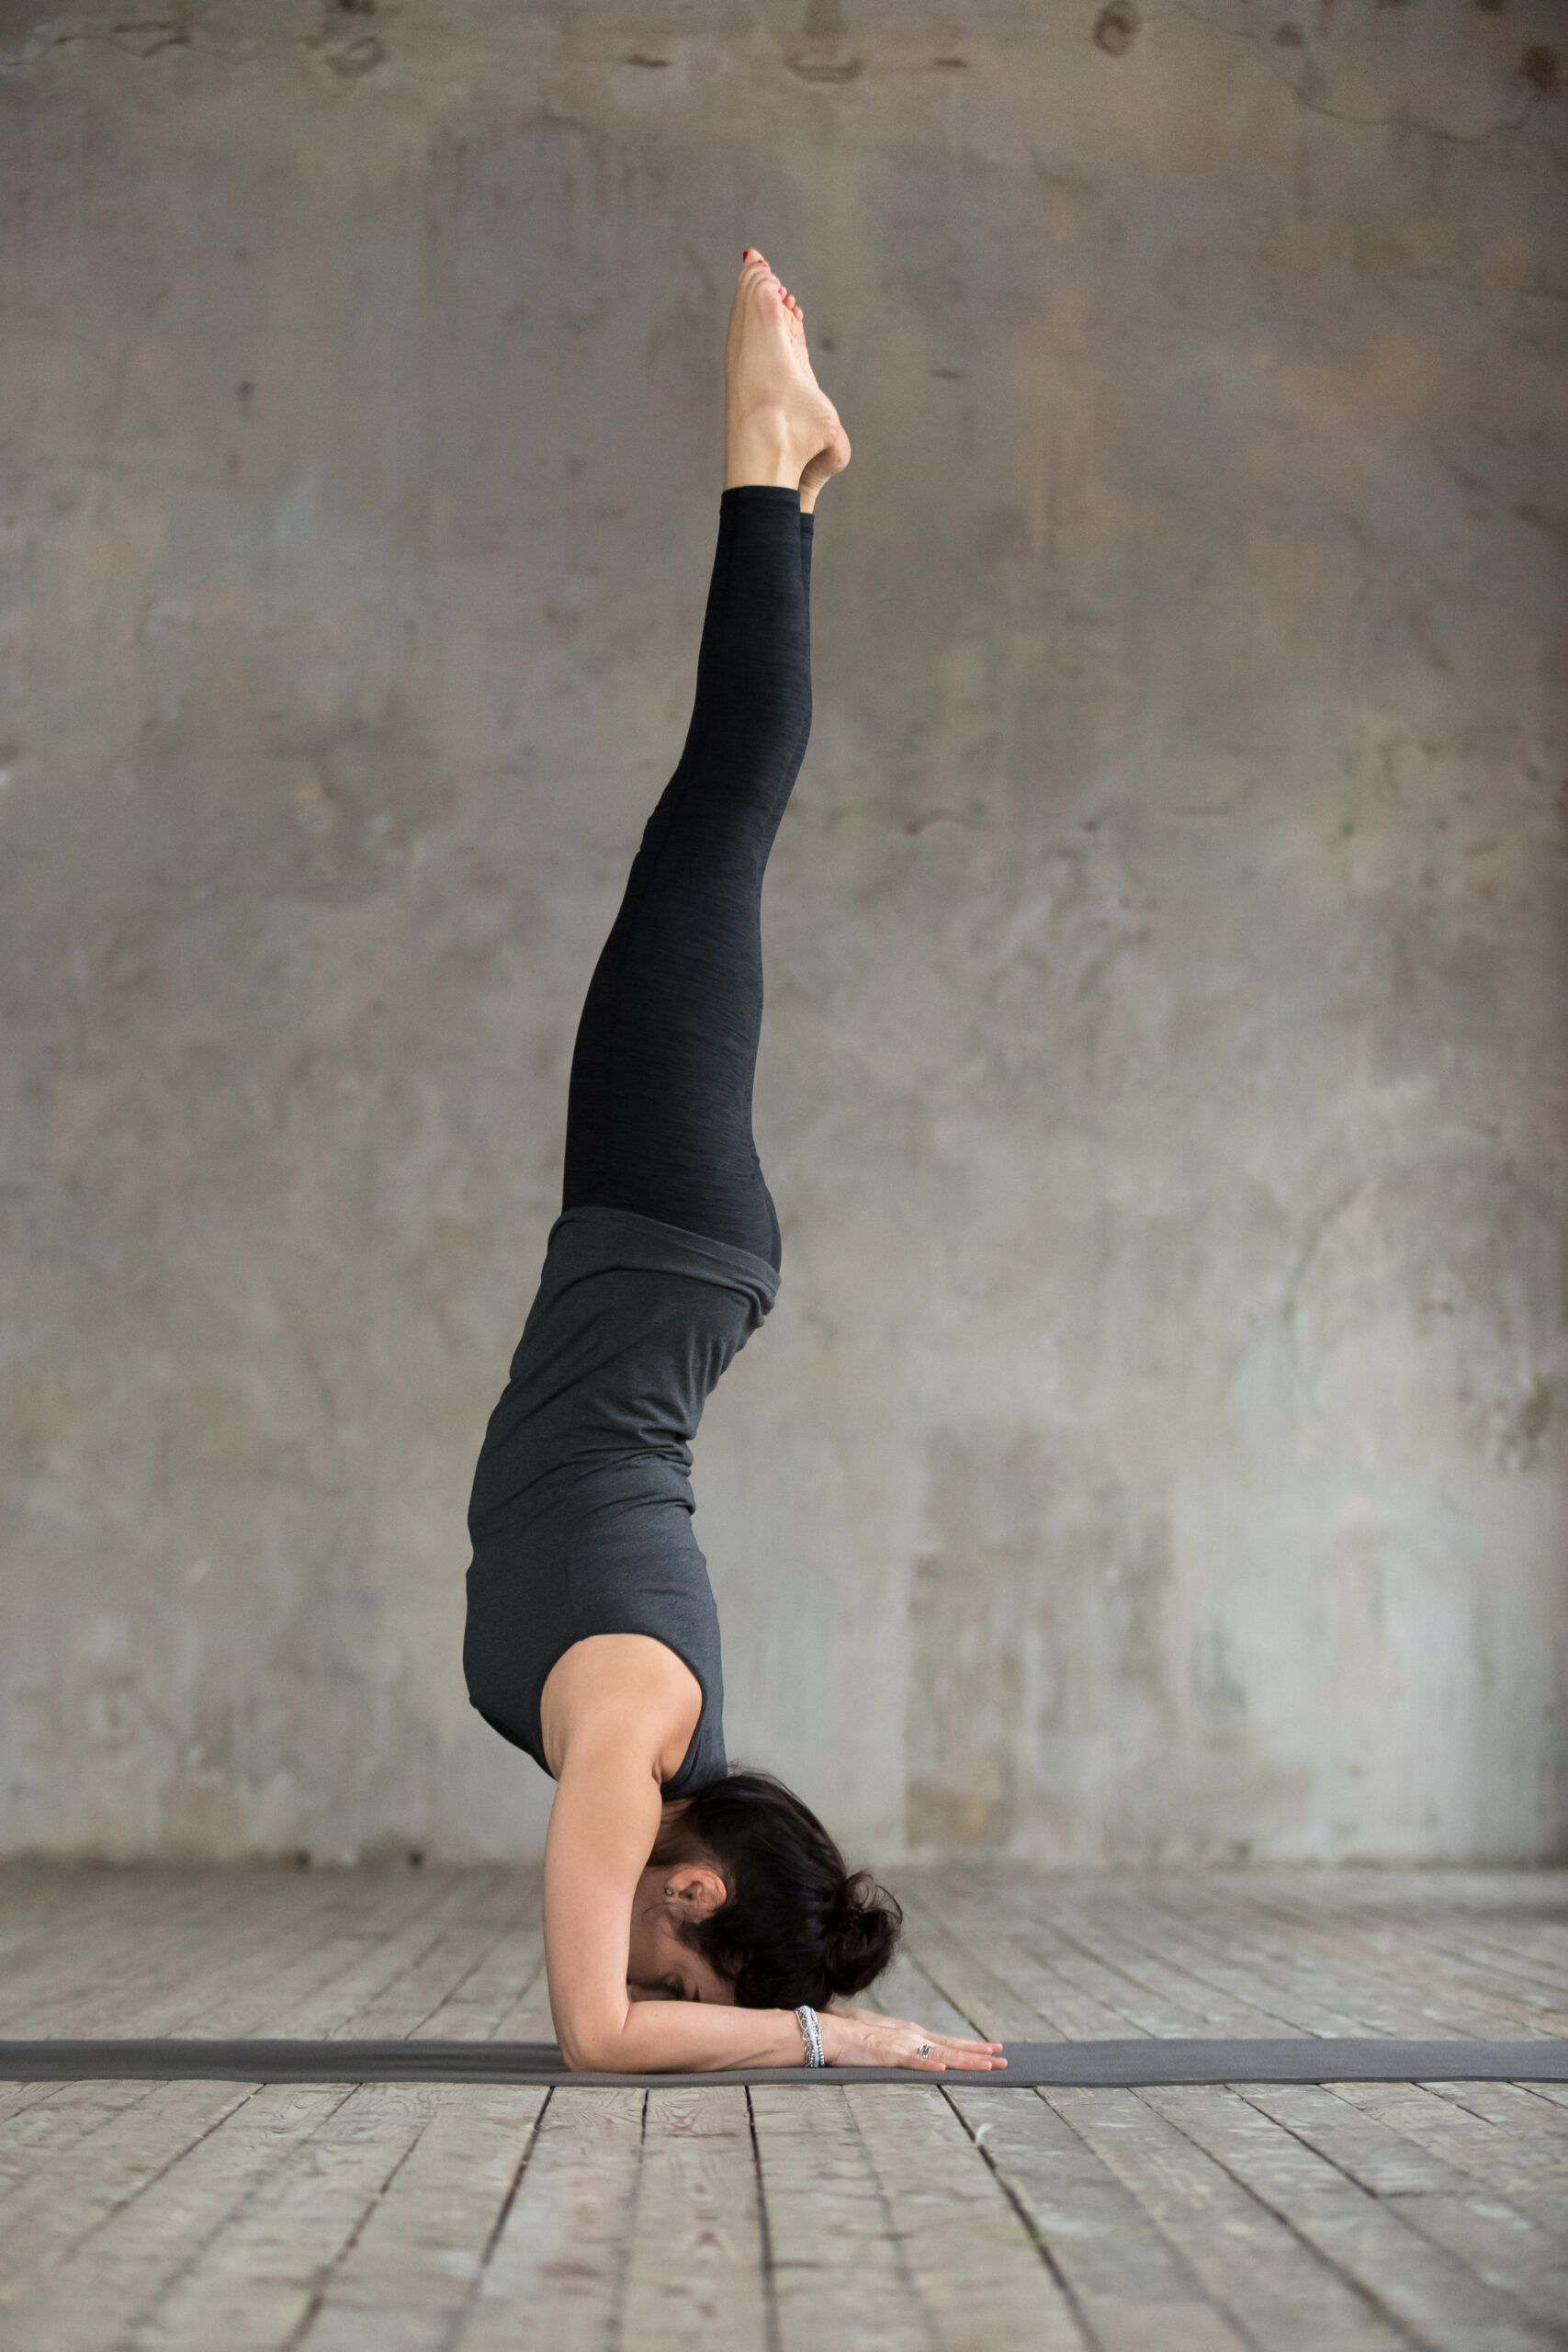 inverted yoga poses